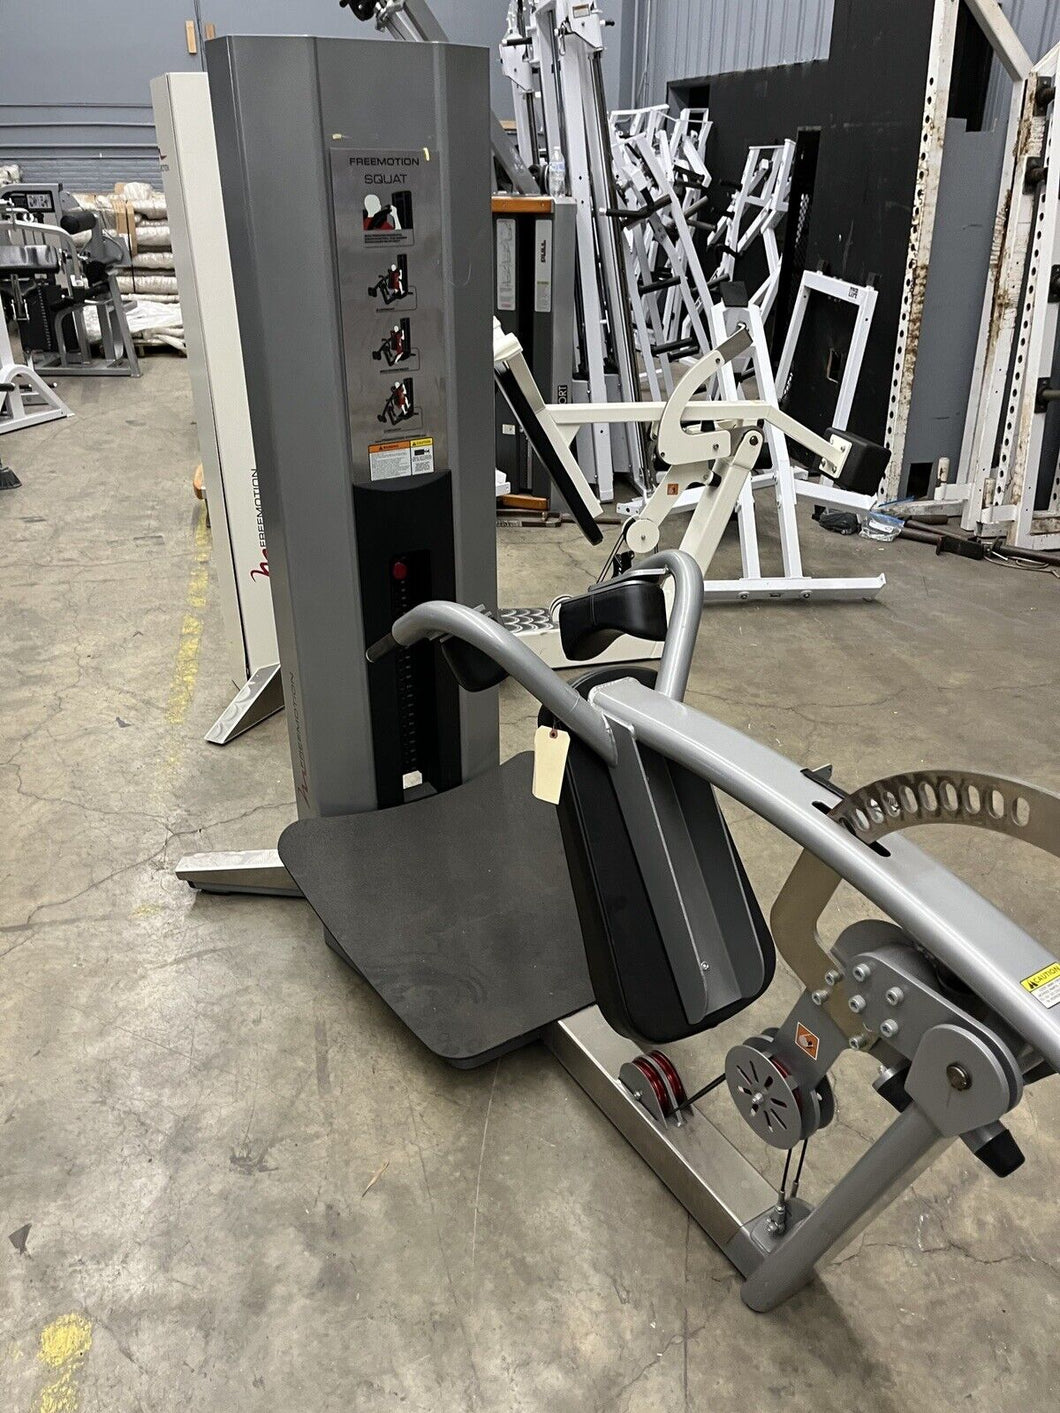 Freemotion Squat Commercial Gym Equipment